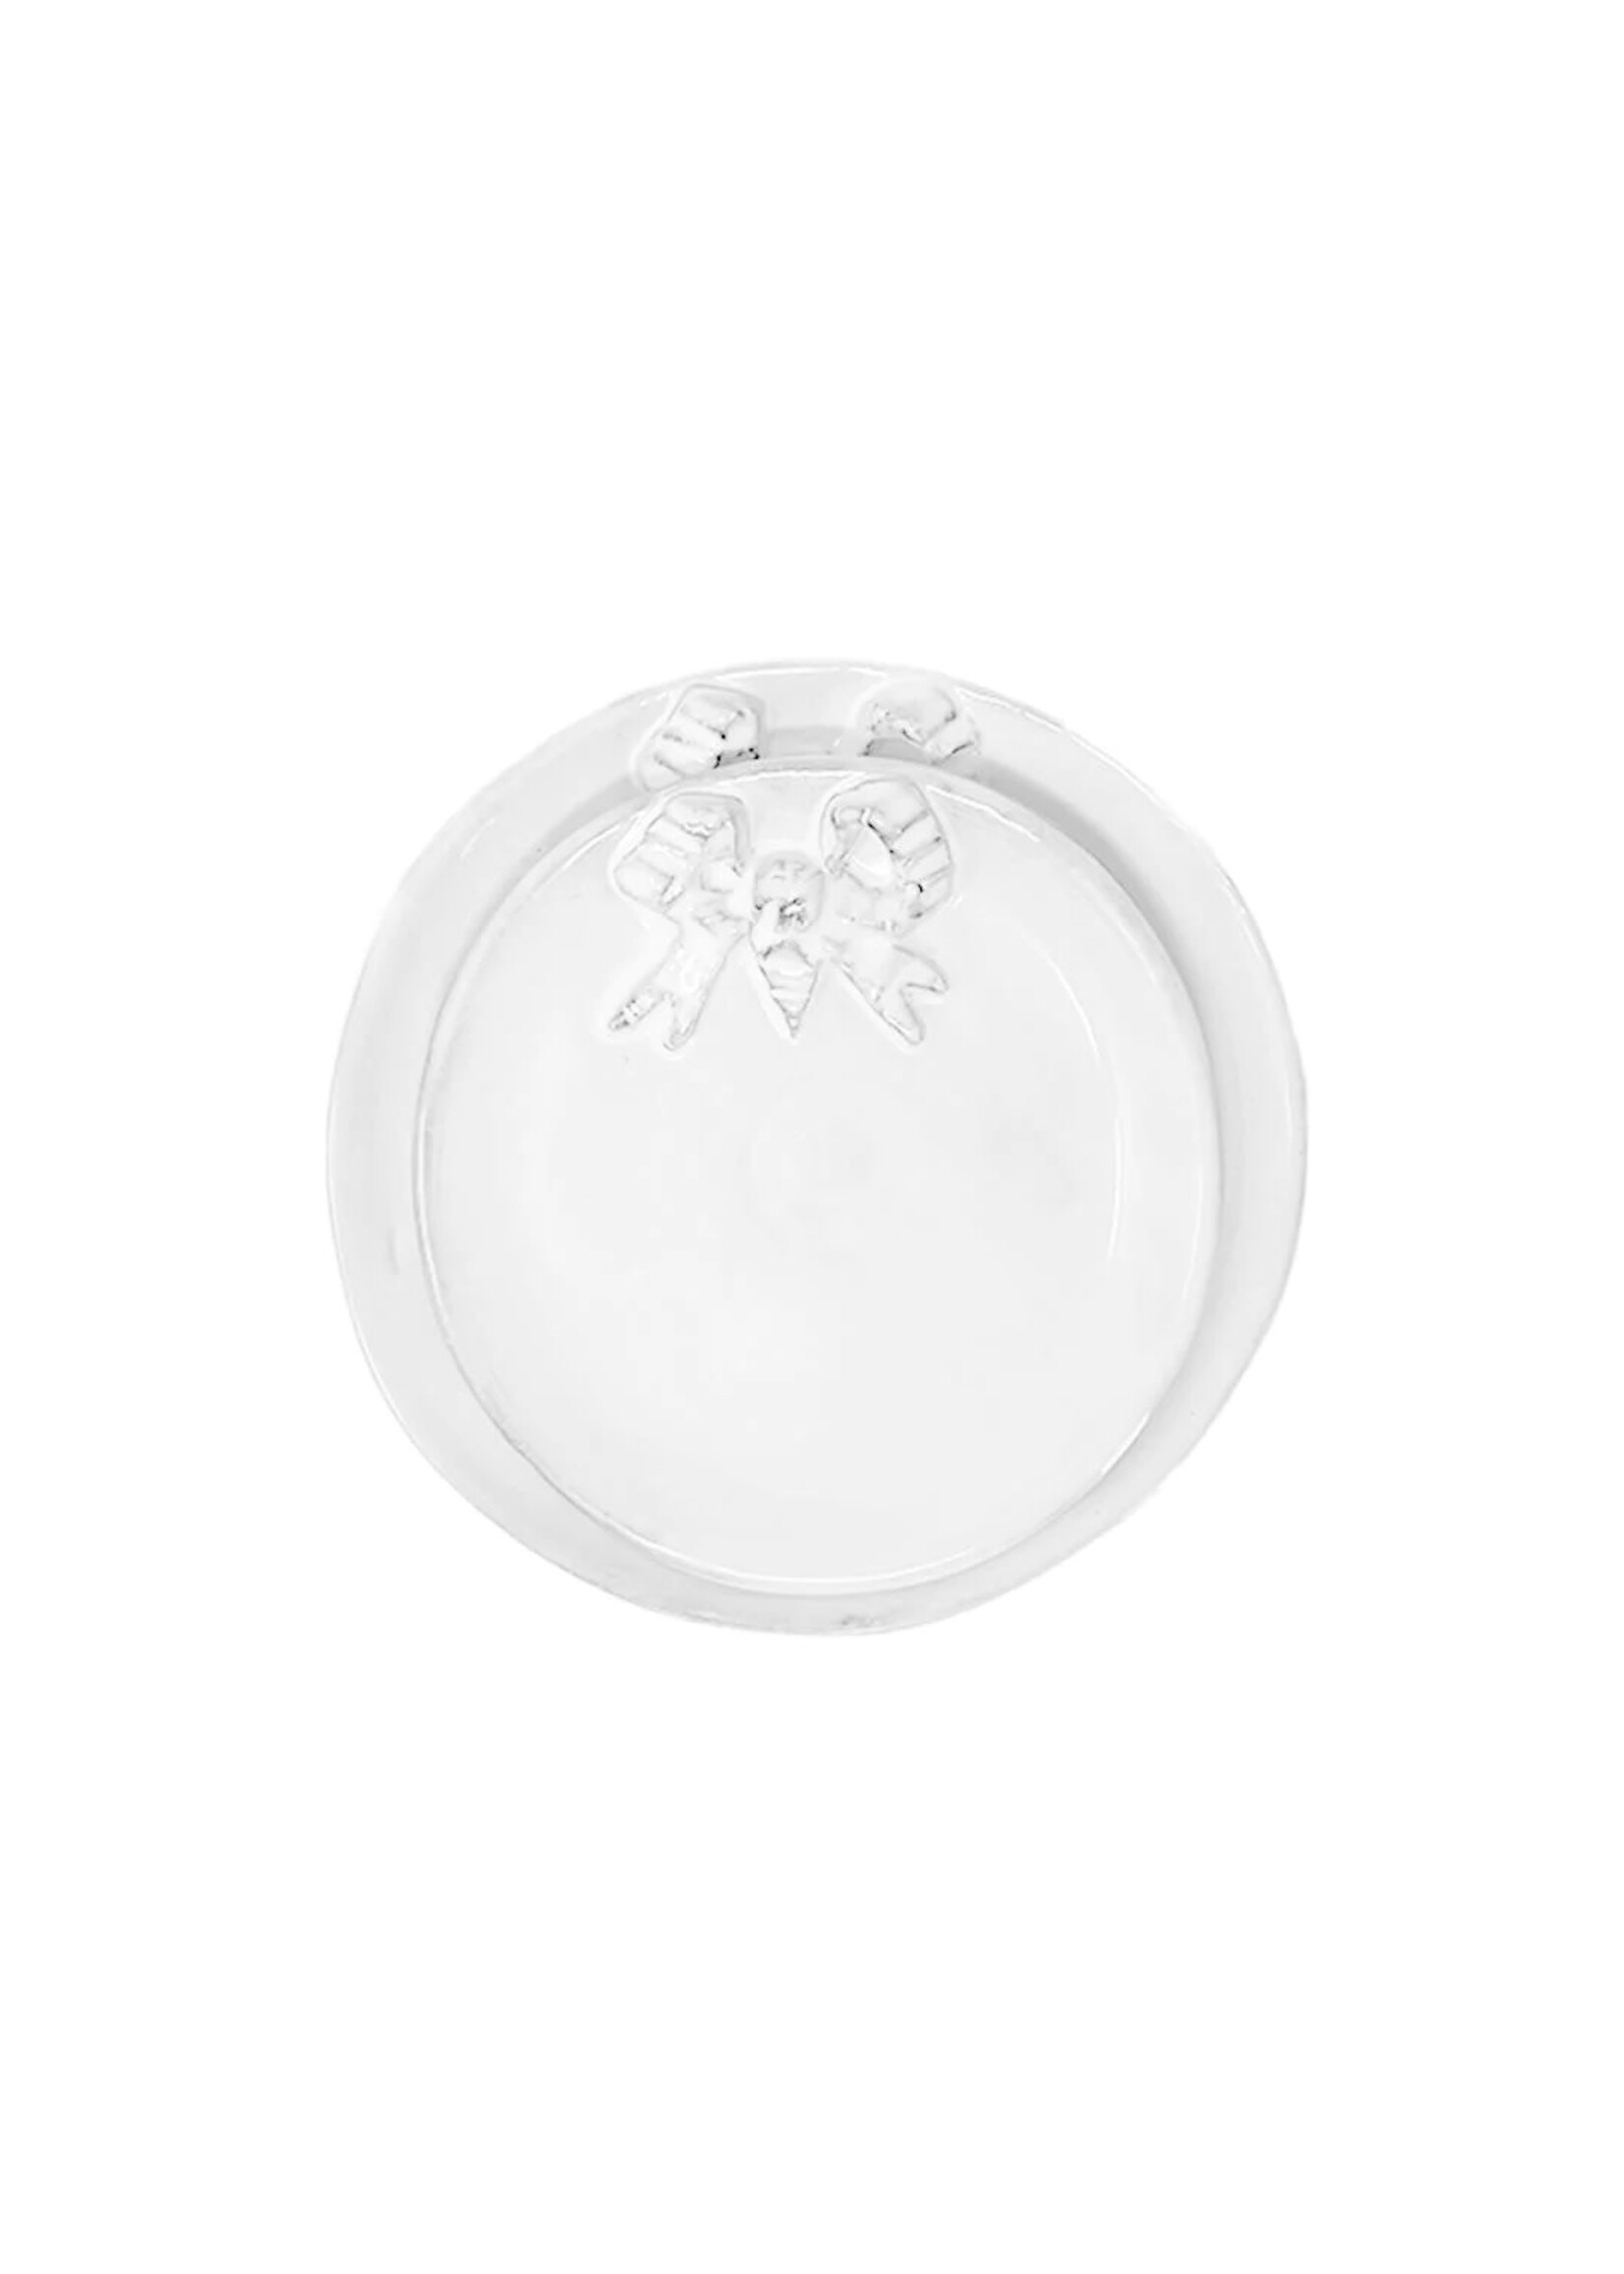 Carron Marie Antoinette Ribbon Plate - Small by Carron